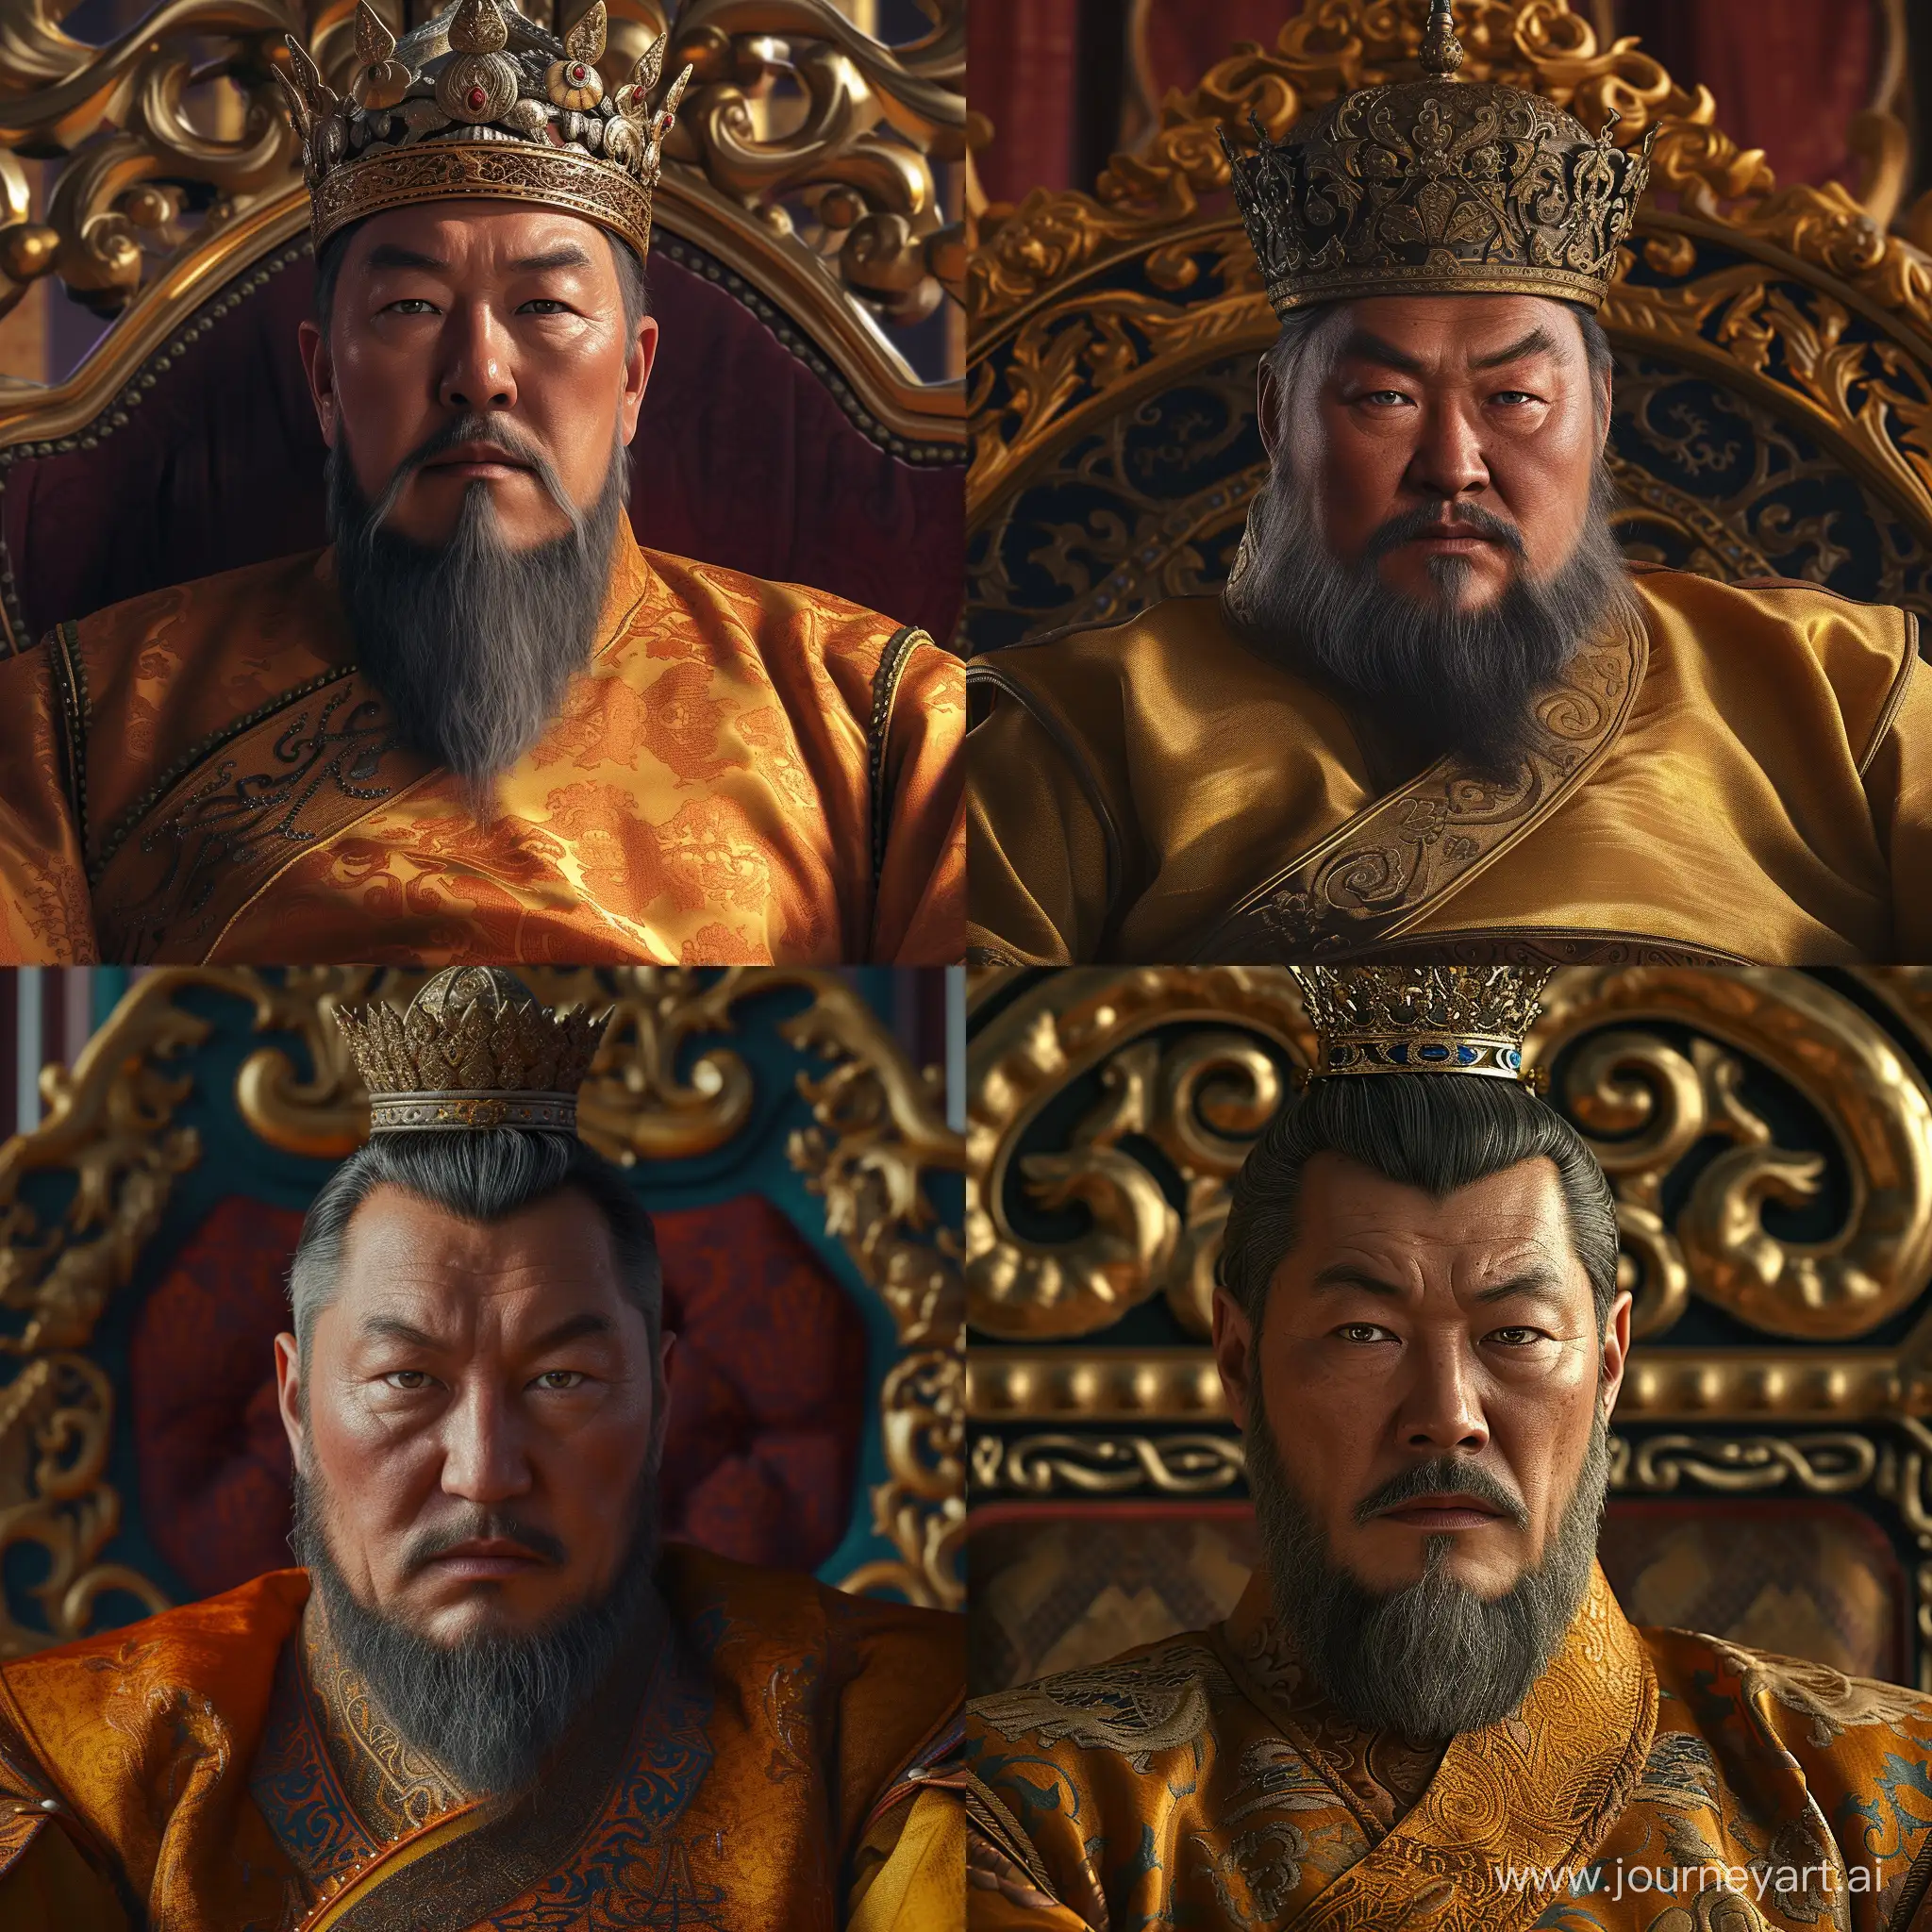 Turko-Mongol Khan sitting on throne. He is around 50 years old. He has gray-black shaped average beard and monolid asian eyes and short hair. He is wearing silk asian attire and a crown-hat. His face is sharp. His throne is luxury. He is at palace. Close up to the face. Realistic image